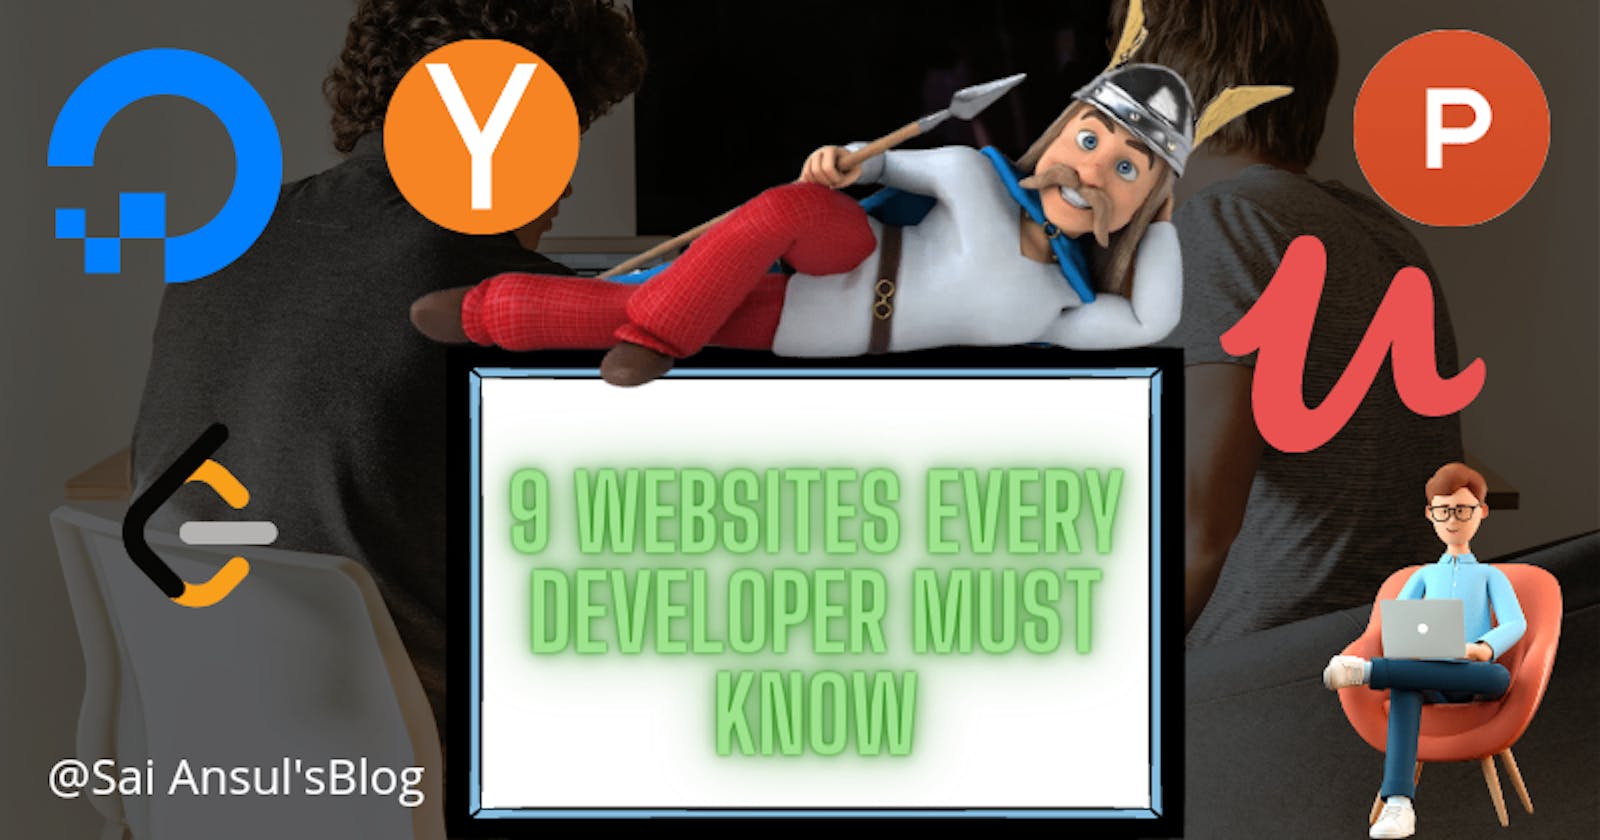 9 websites every developer must know